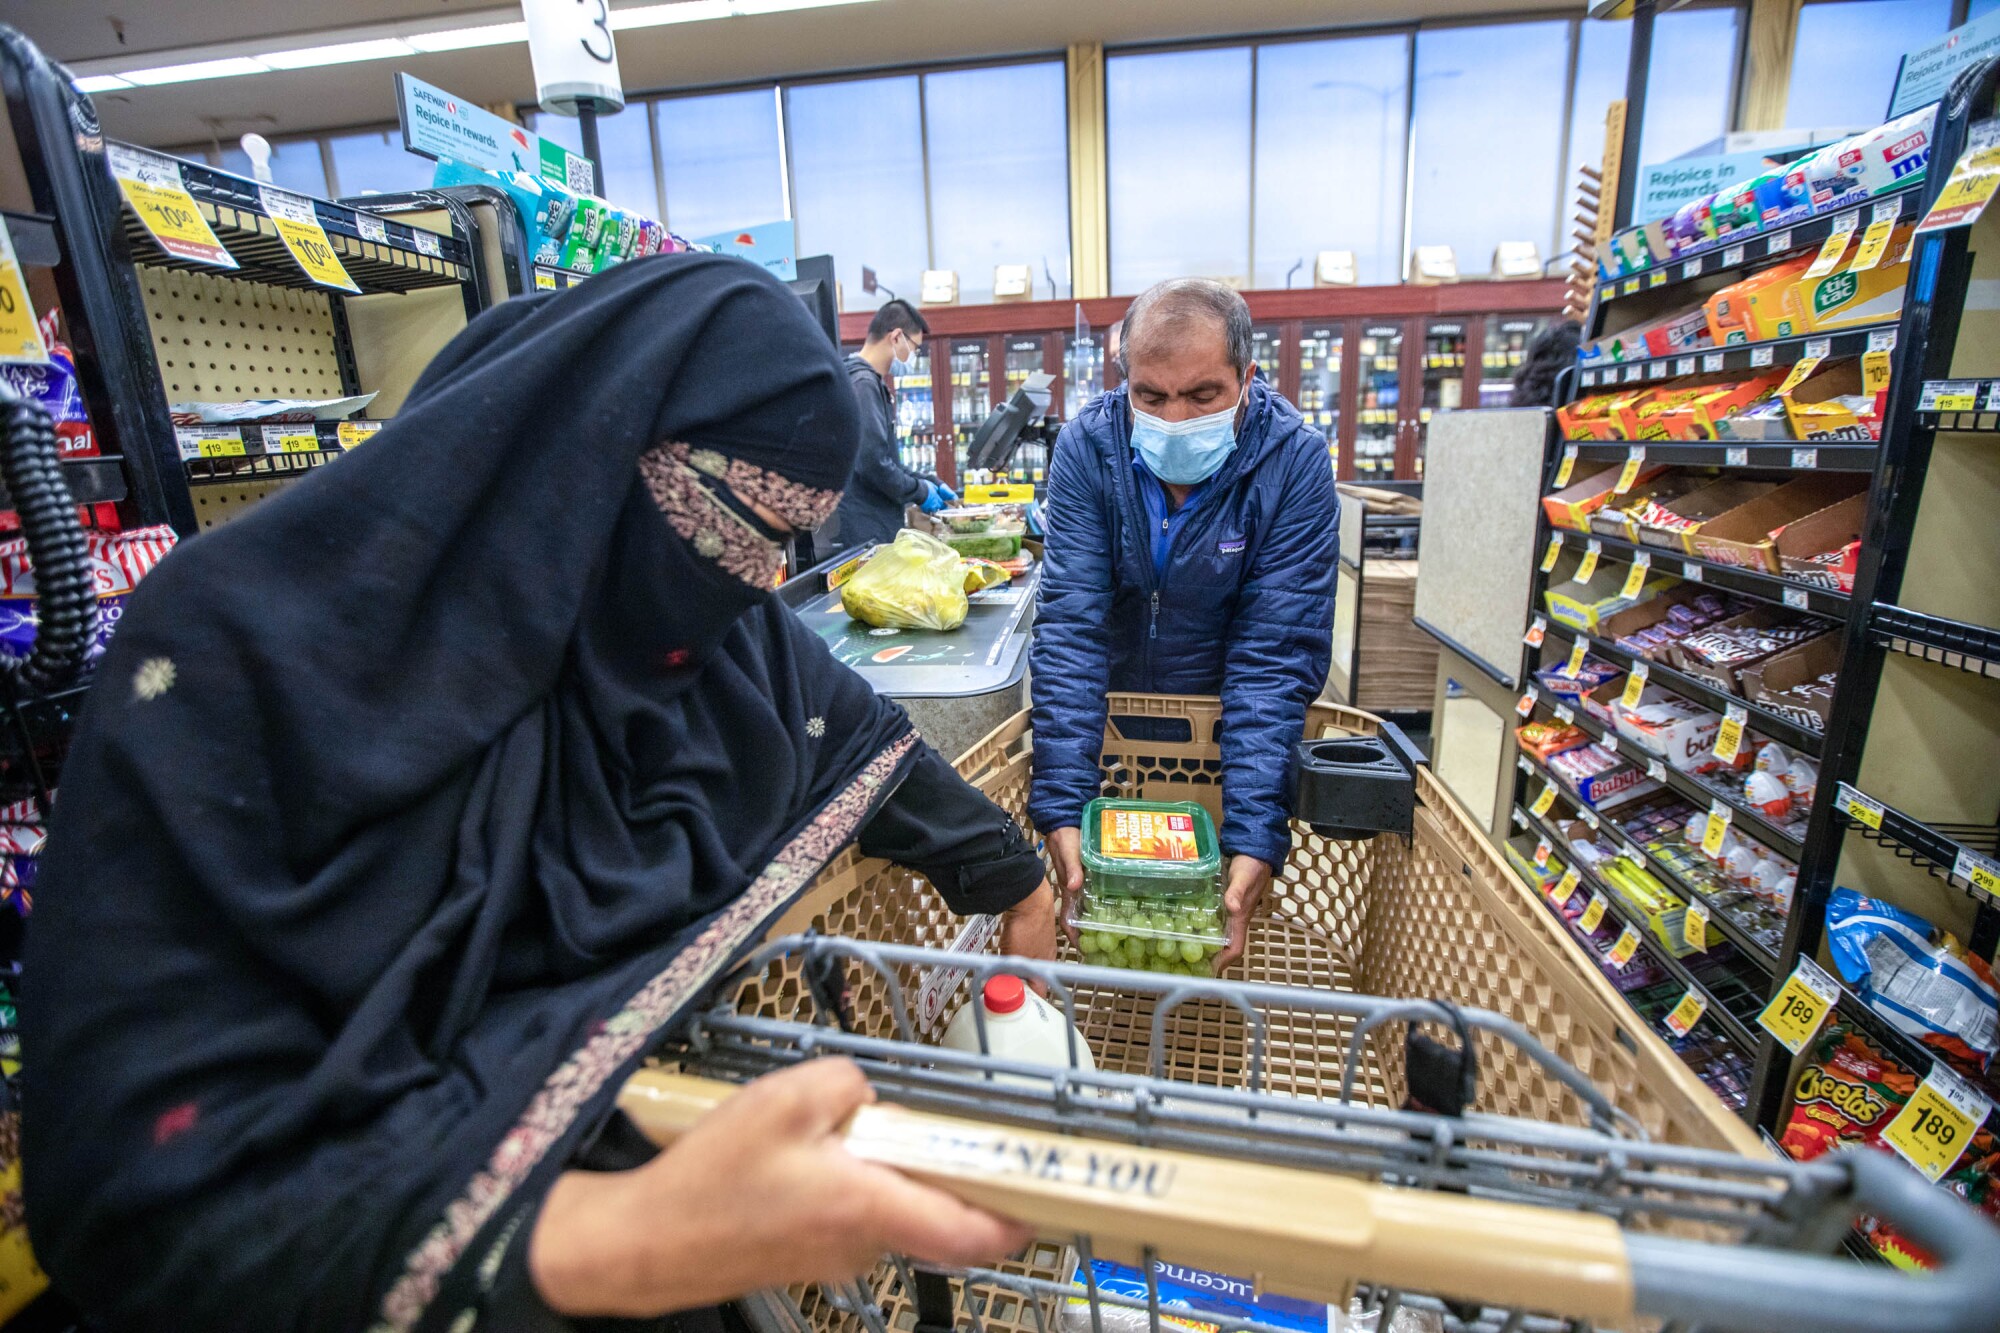 Afghan refugees Abdul Matin Qadiri and his wife shop for groceries.